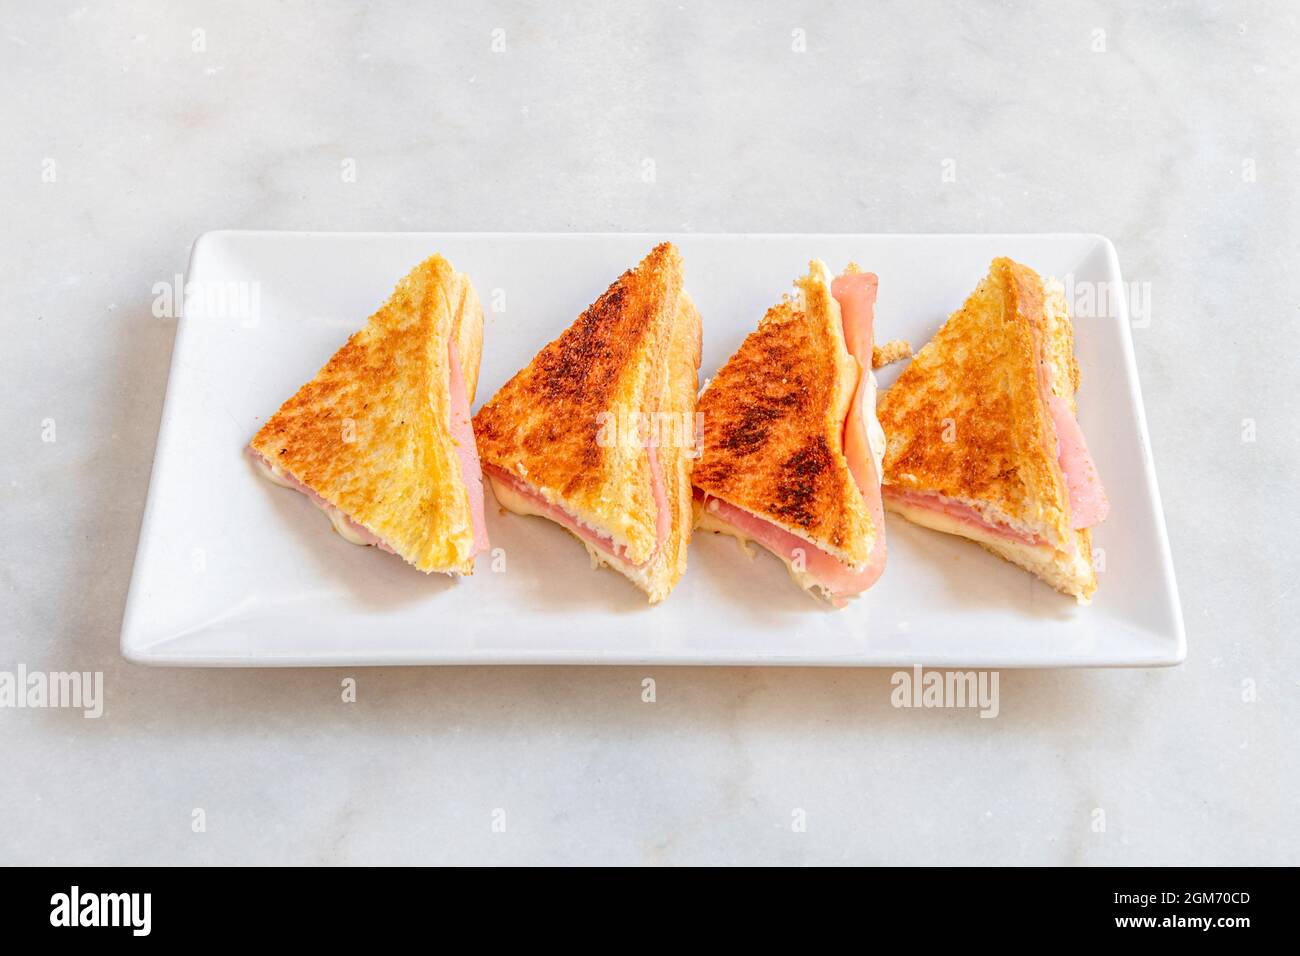 Mixed sandwich of grilled sliced bread with cheese and ham on a white plate. Stock Photo